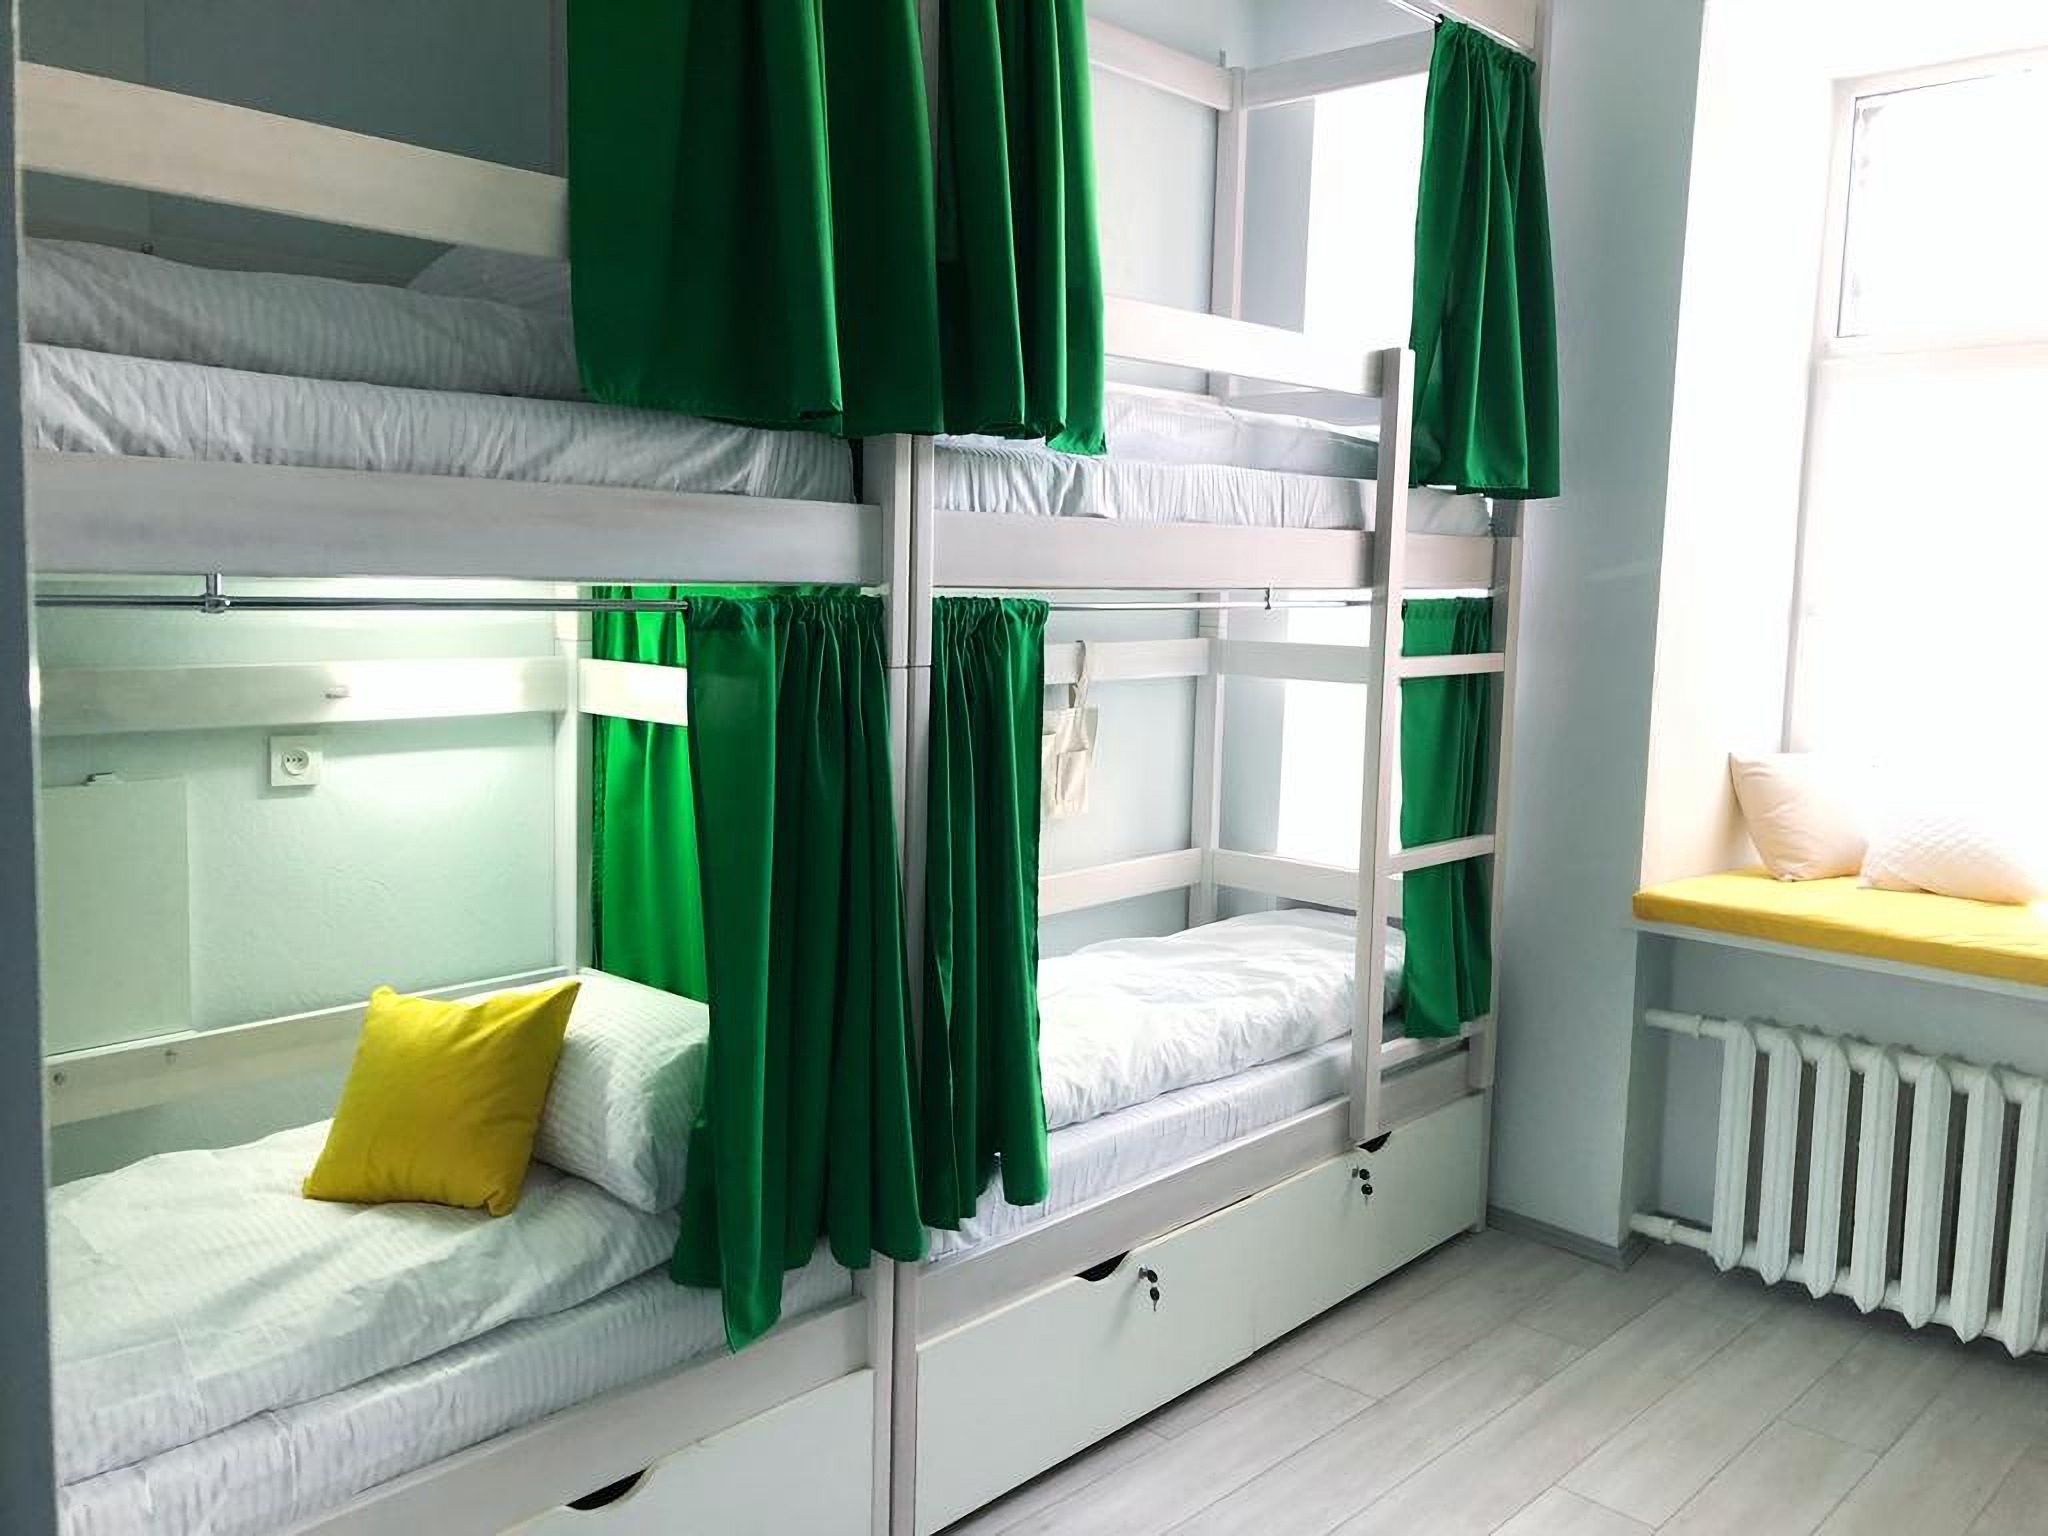 Rooms in the hostel